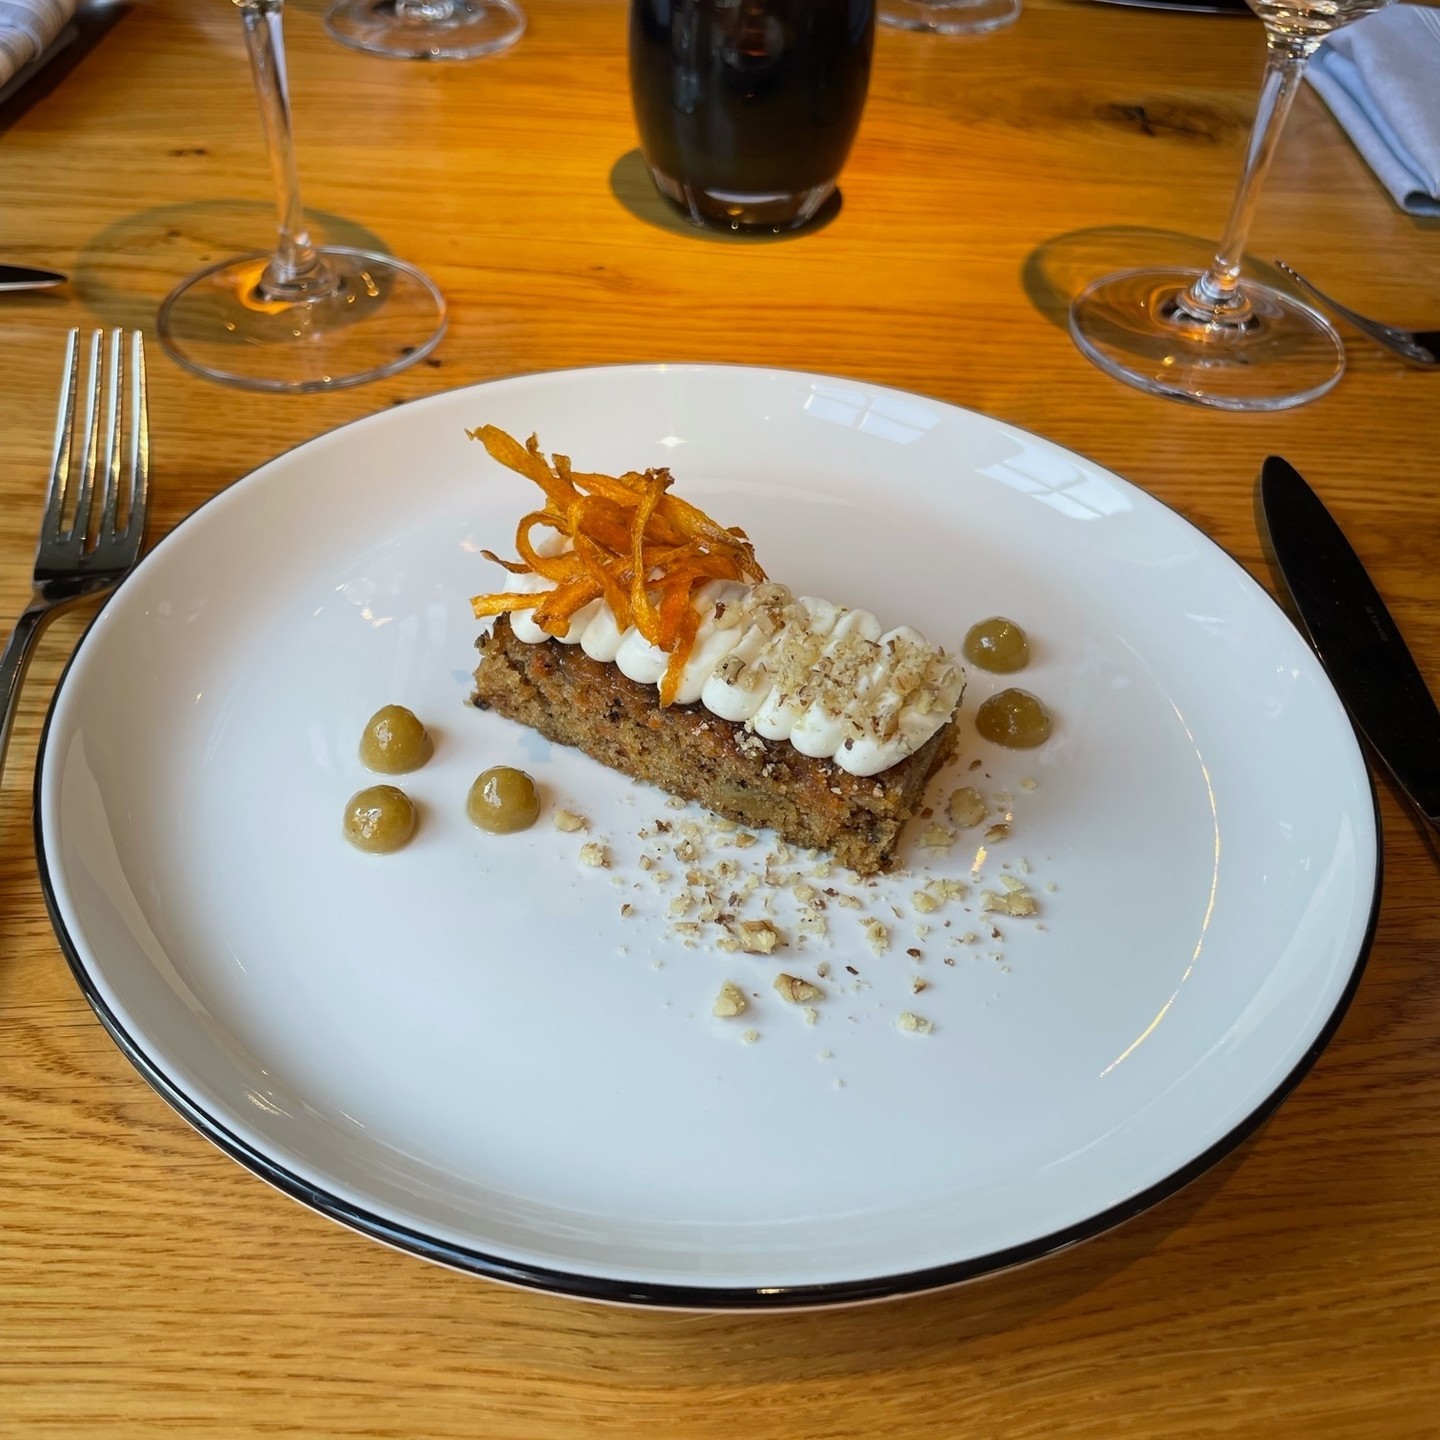 New Dessert Alert! Try the carrot cake with walnuts and a cream cheese and marscapone frosting served with crispy carrots and a golden raisin and verjus puree<br/>
<br/>
<br/>
<br/>
#desserts #carrotcake #itsavegetable #southofbroad #charleston #chseats #eatlocal